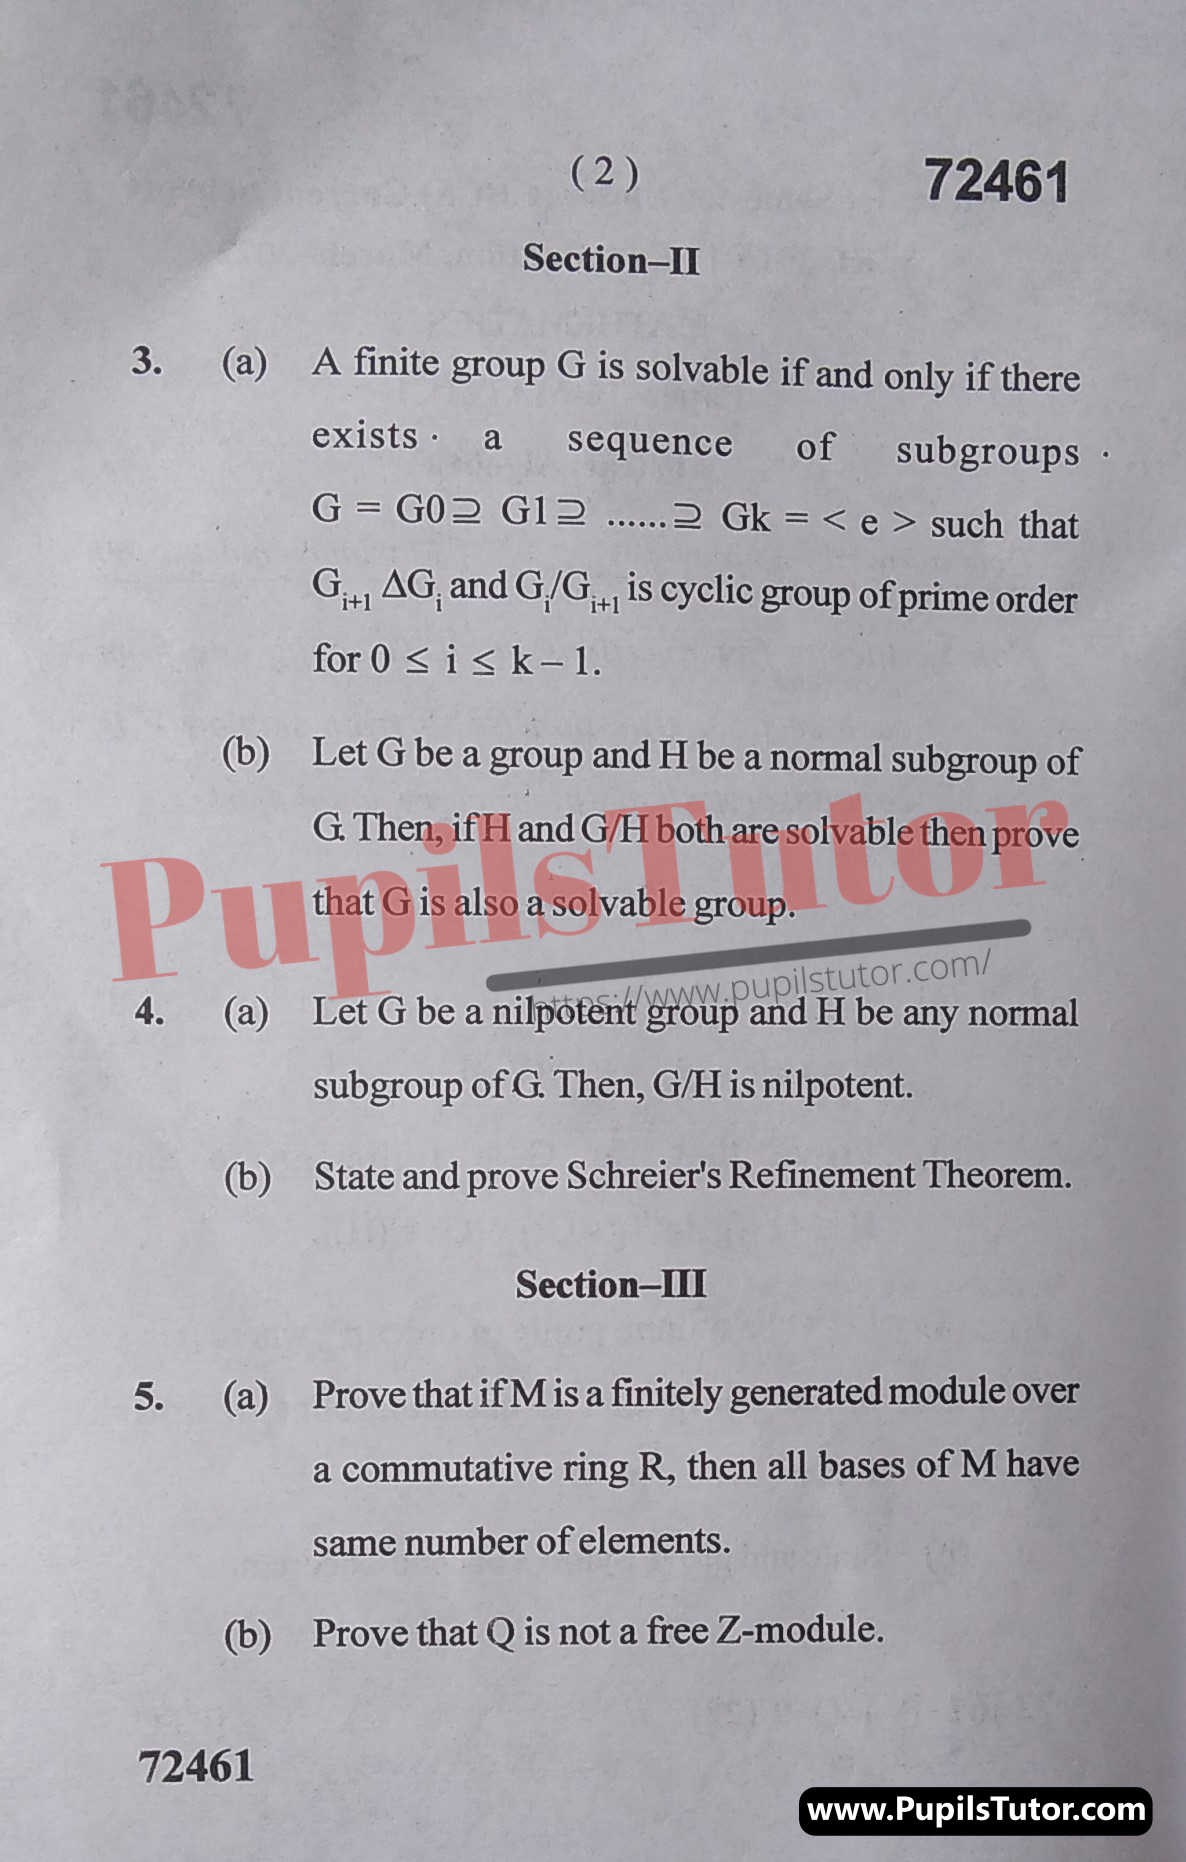 M.D. University M.Sc. [Mathematics] Abstract Algebra First Semester Important Question Answer And Solution - www.pupilstutor.com (Paper Page Number 2)